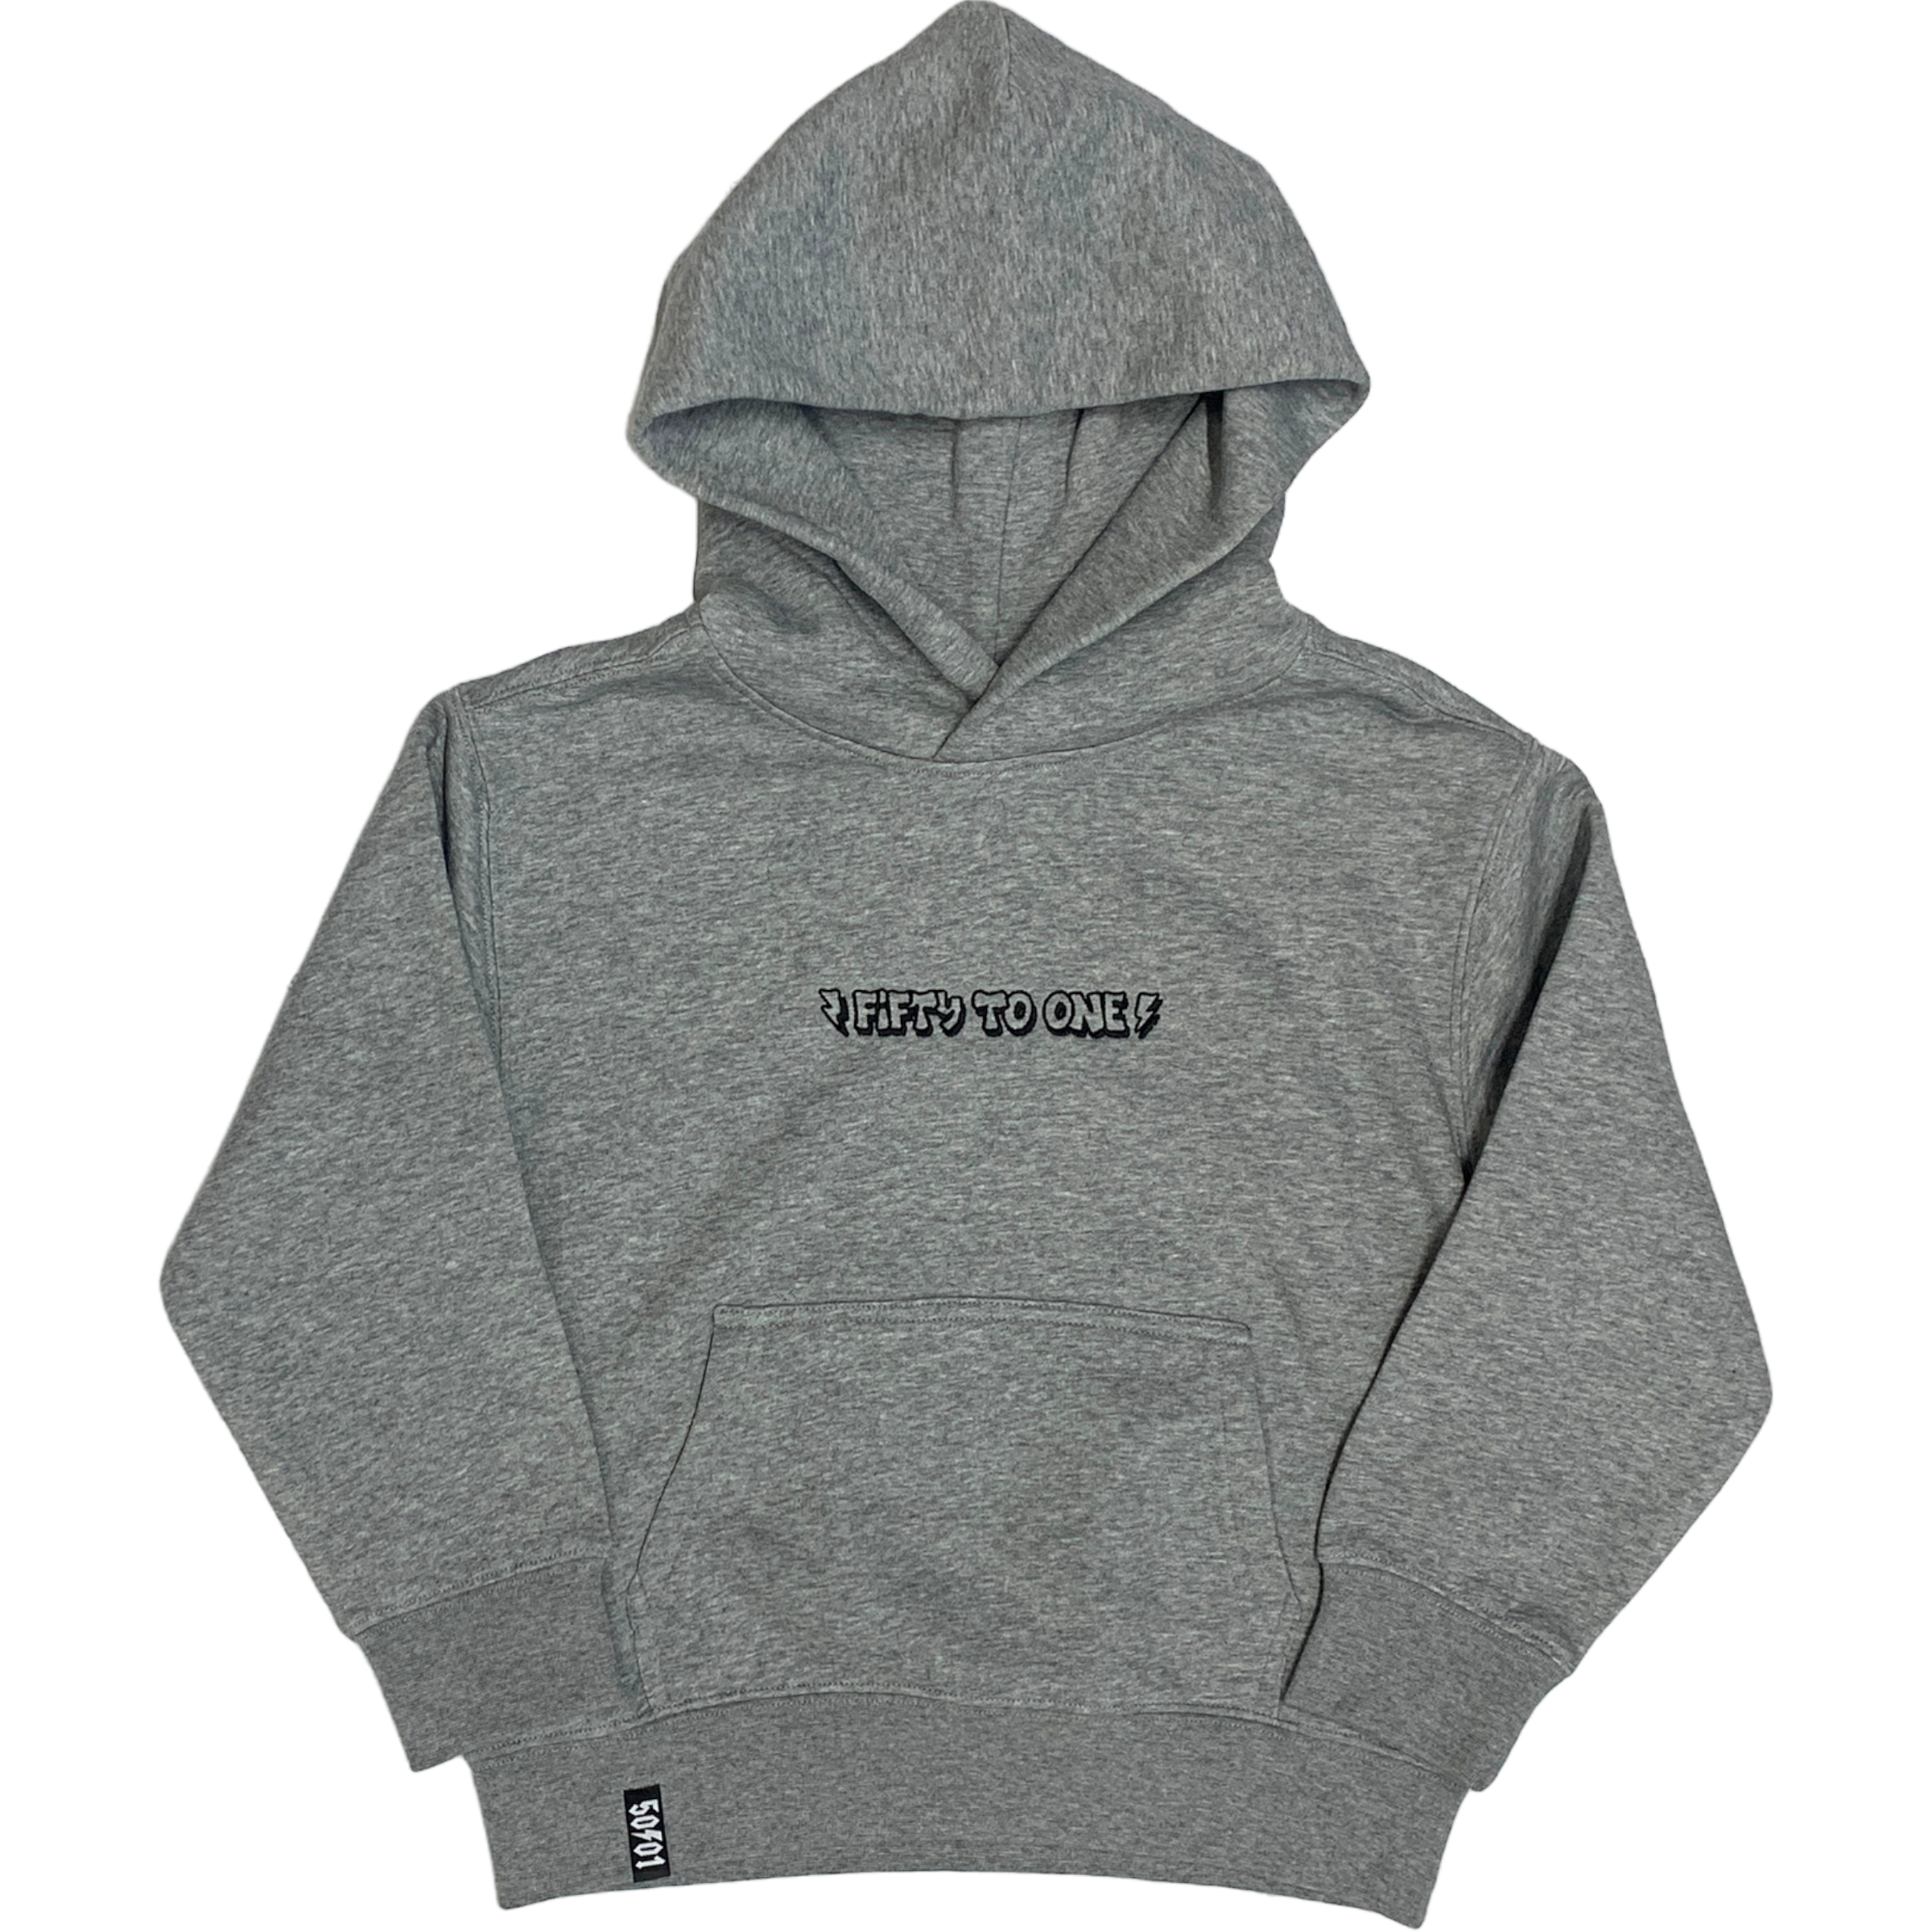 50to01 YOUTH - BUBBLE LETTER HOODIE GREY